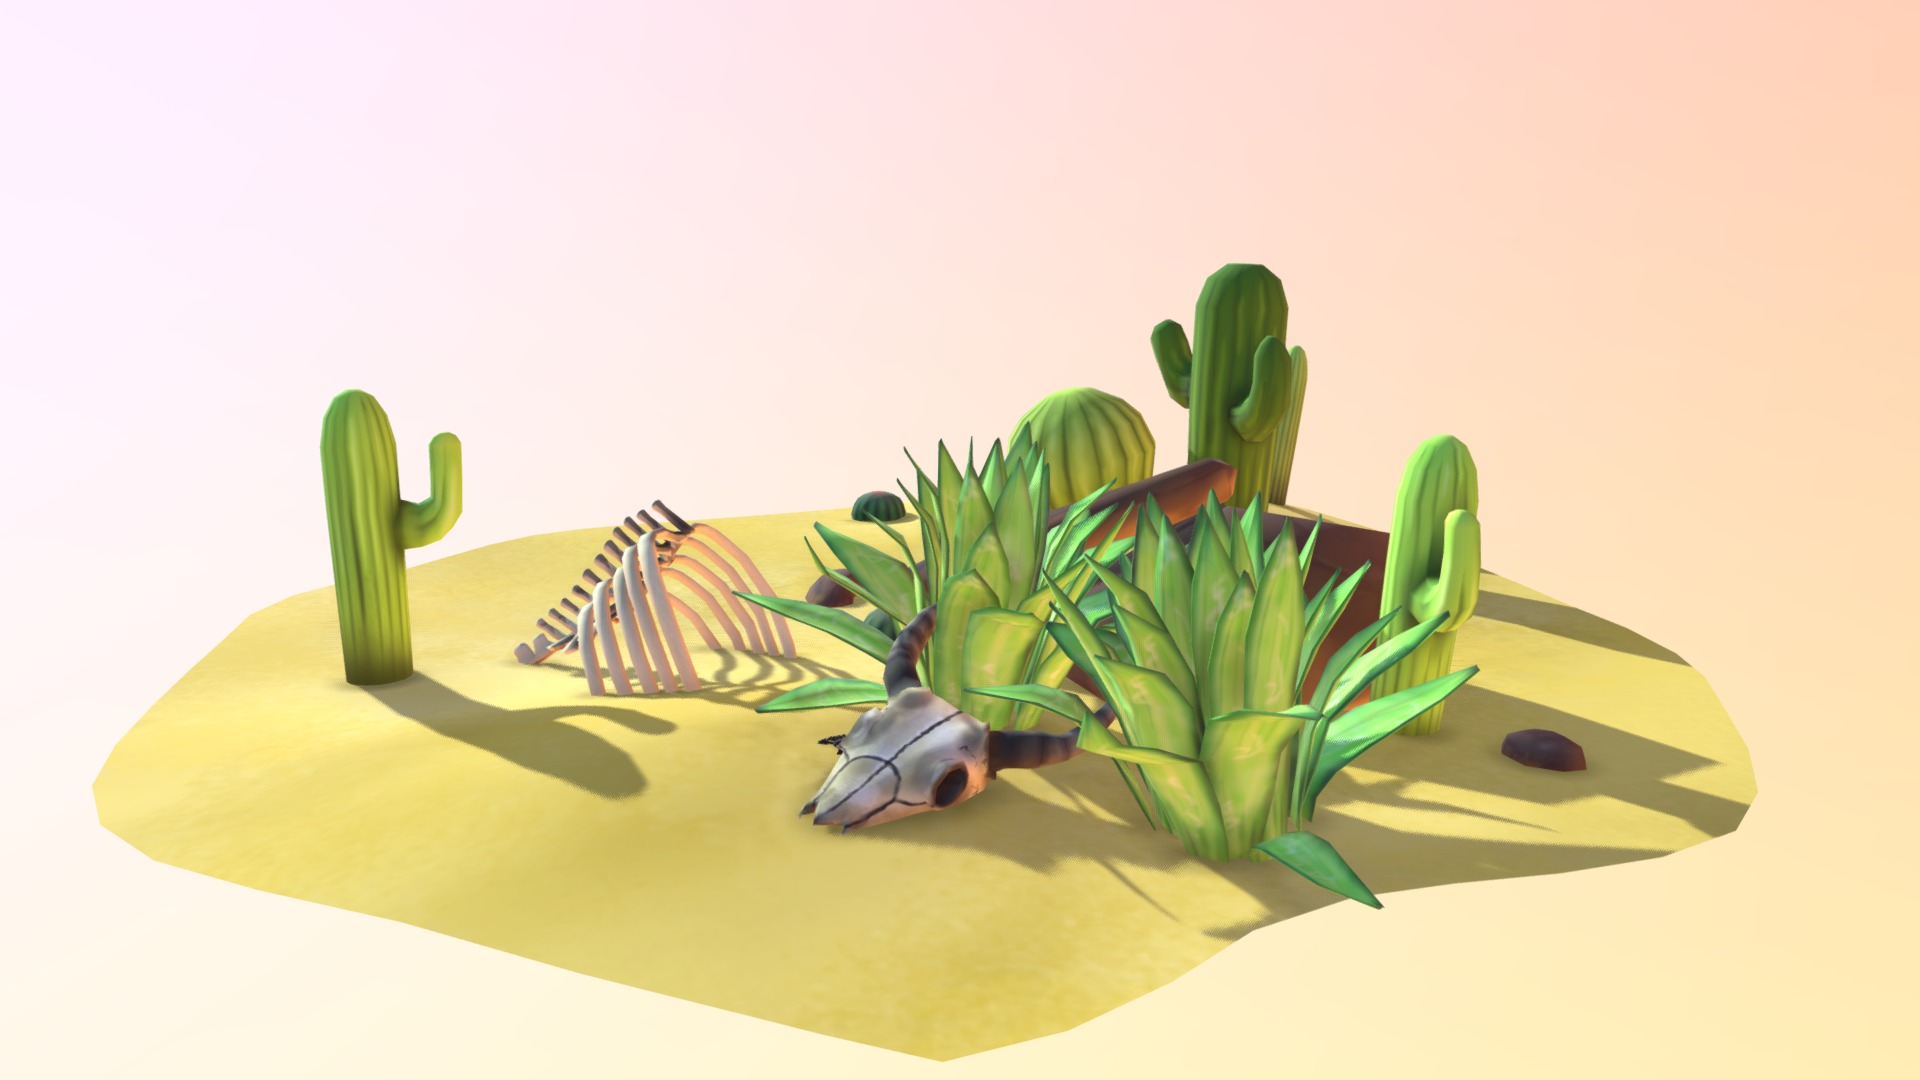 3D model Small desert with scorpion - This is a 3D model of the Small desert with scorpion. The 3D model is about a cartoon of a boat and plants.